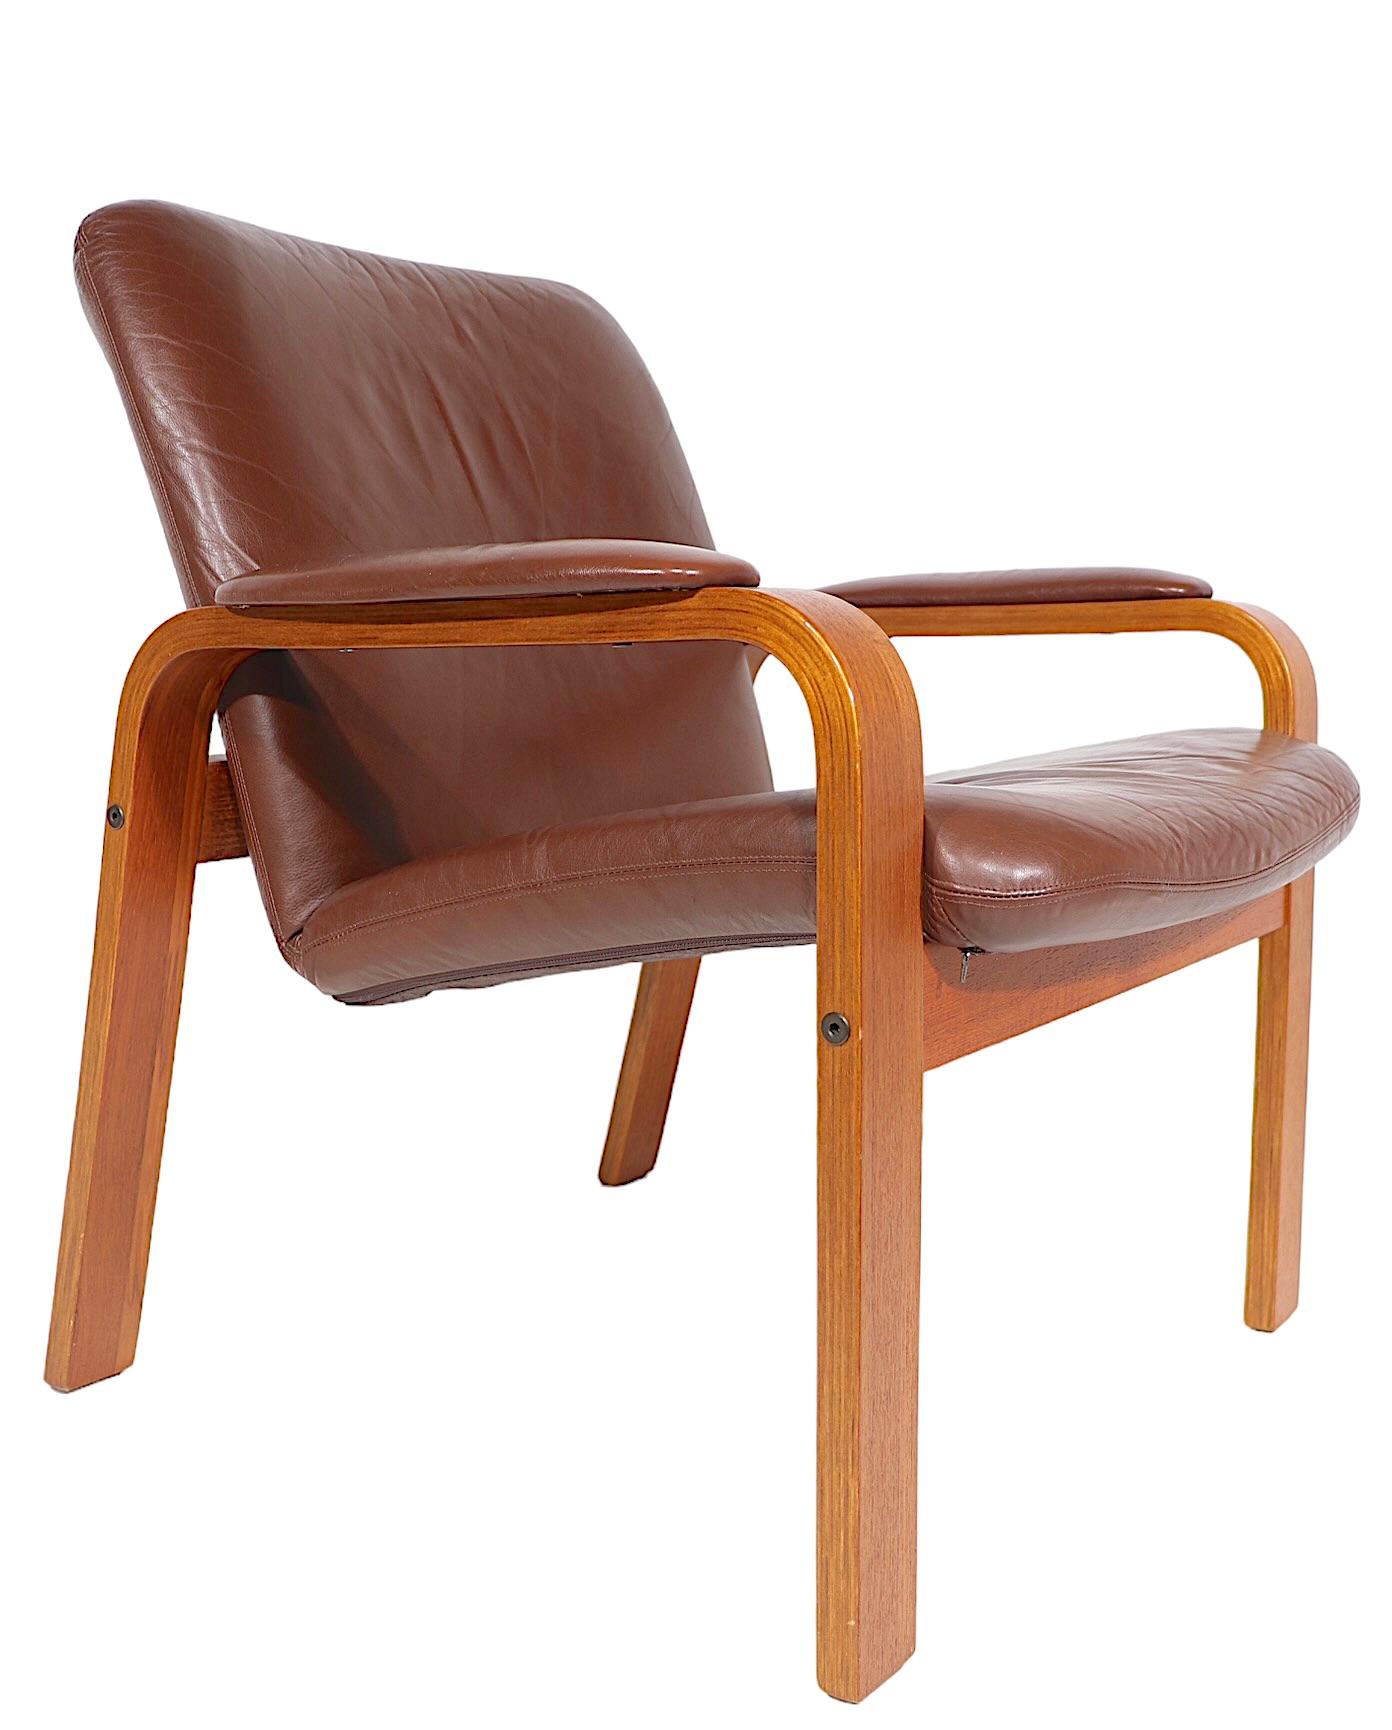 Pr. Scandinavian Mid Century Modern Lounge Arm Chairs Made in Norway by Ekorness For Sale 11